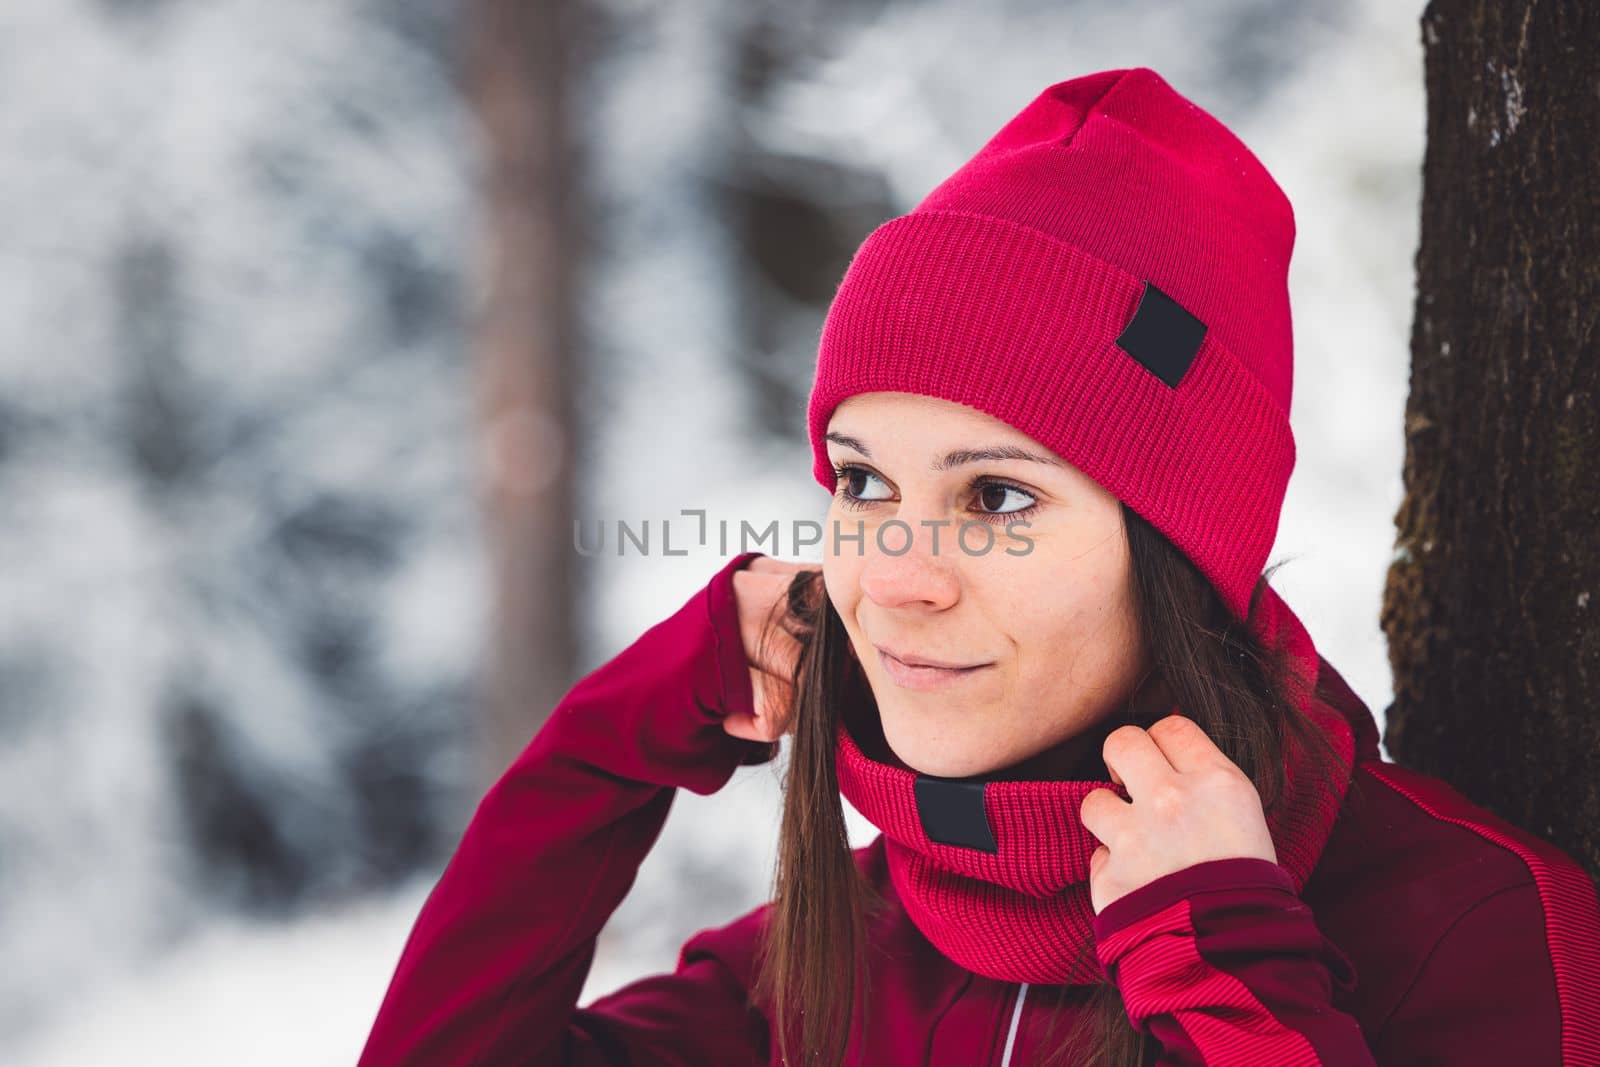 Beautiful brunette wearing a matching red hat and scarf while in the cold snowy forest on a walk by VisualProductions